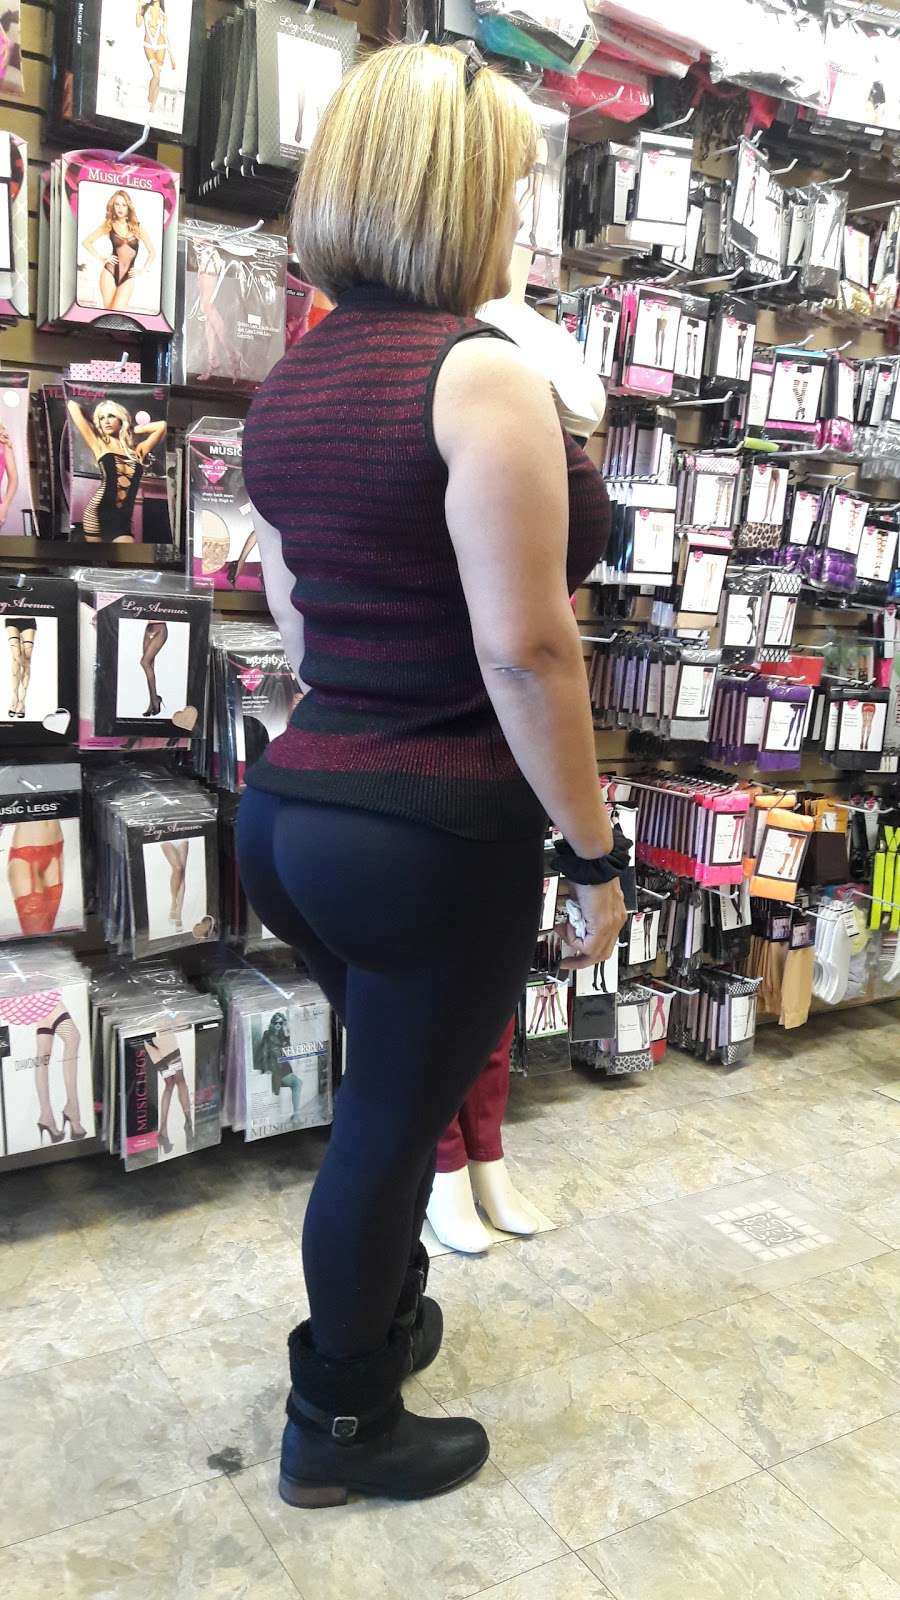 Graces Body Shapers and Lingerie | 2520 E Palmdale Blvd Suite C-5, Palmdale, CA 93550, USA | Phone: (818) 571-4944